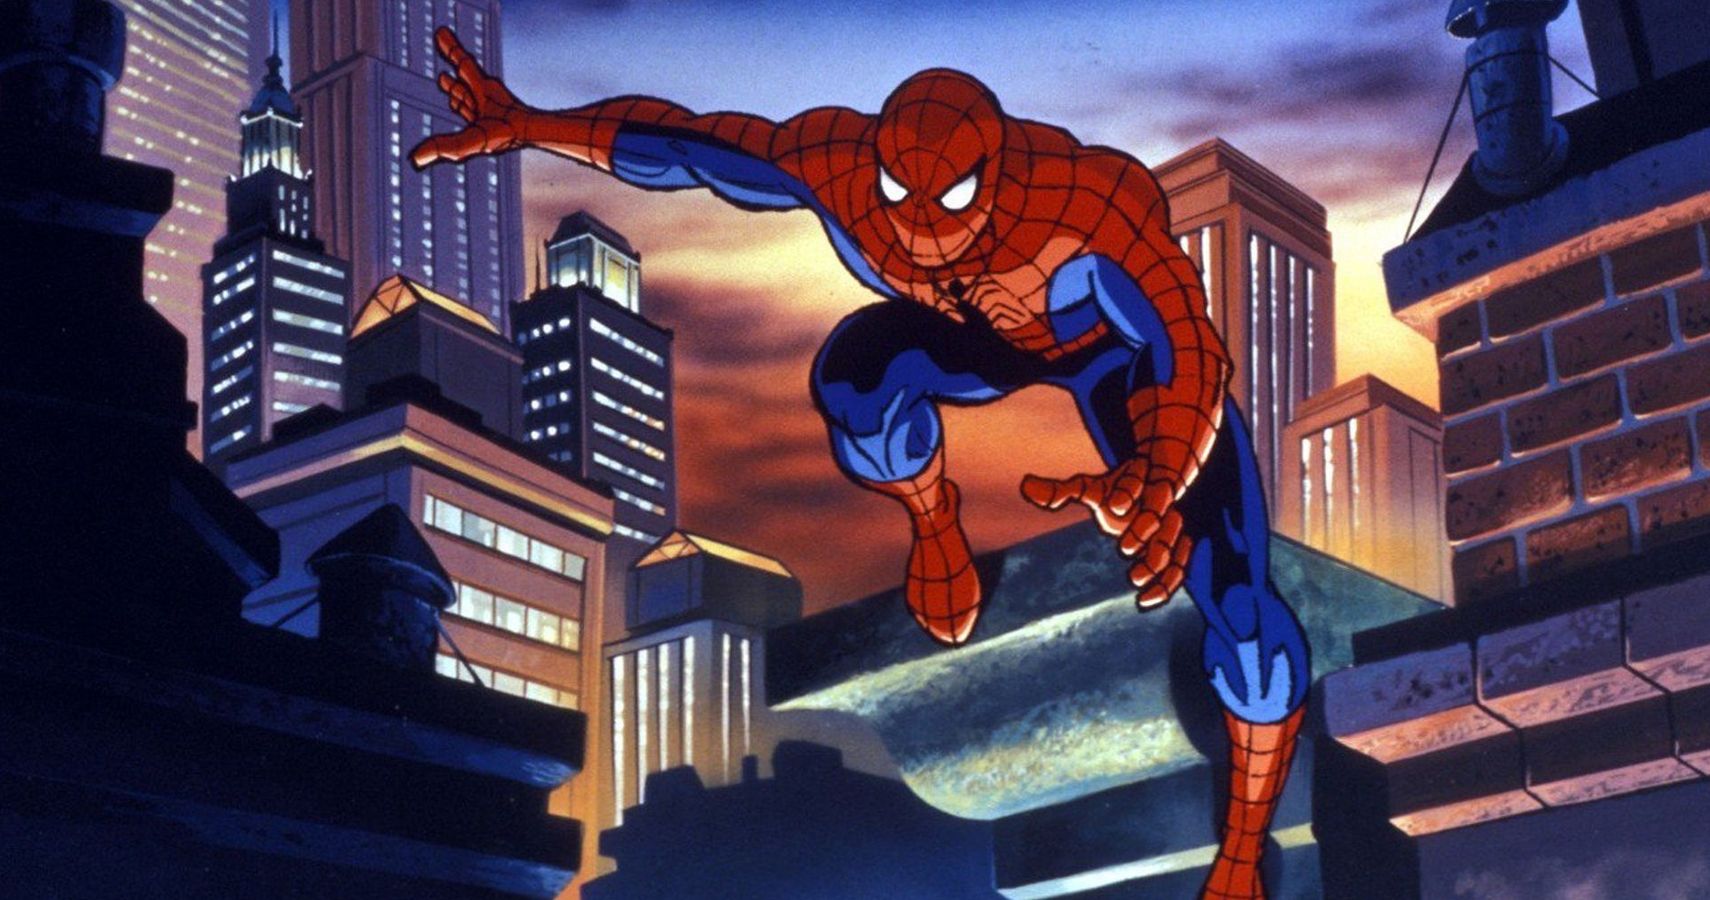 The '90s Animated Spider-Man Series: 5 Things That Have Aged Badly (& 5